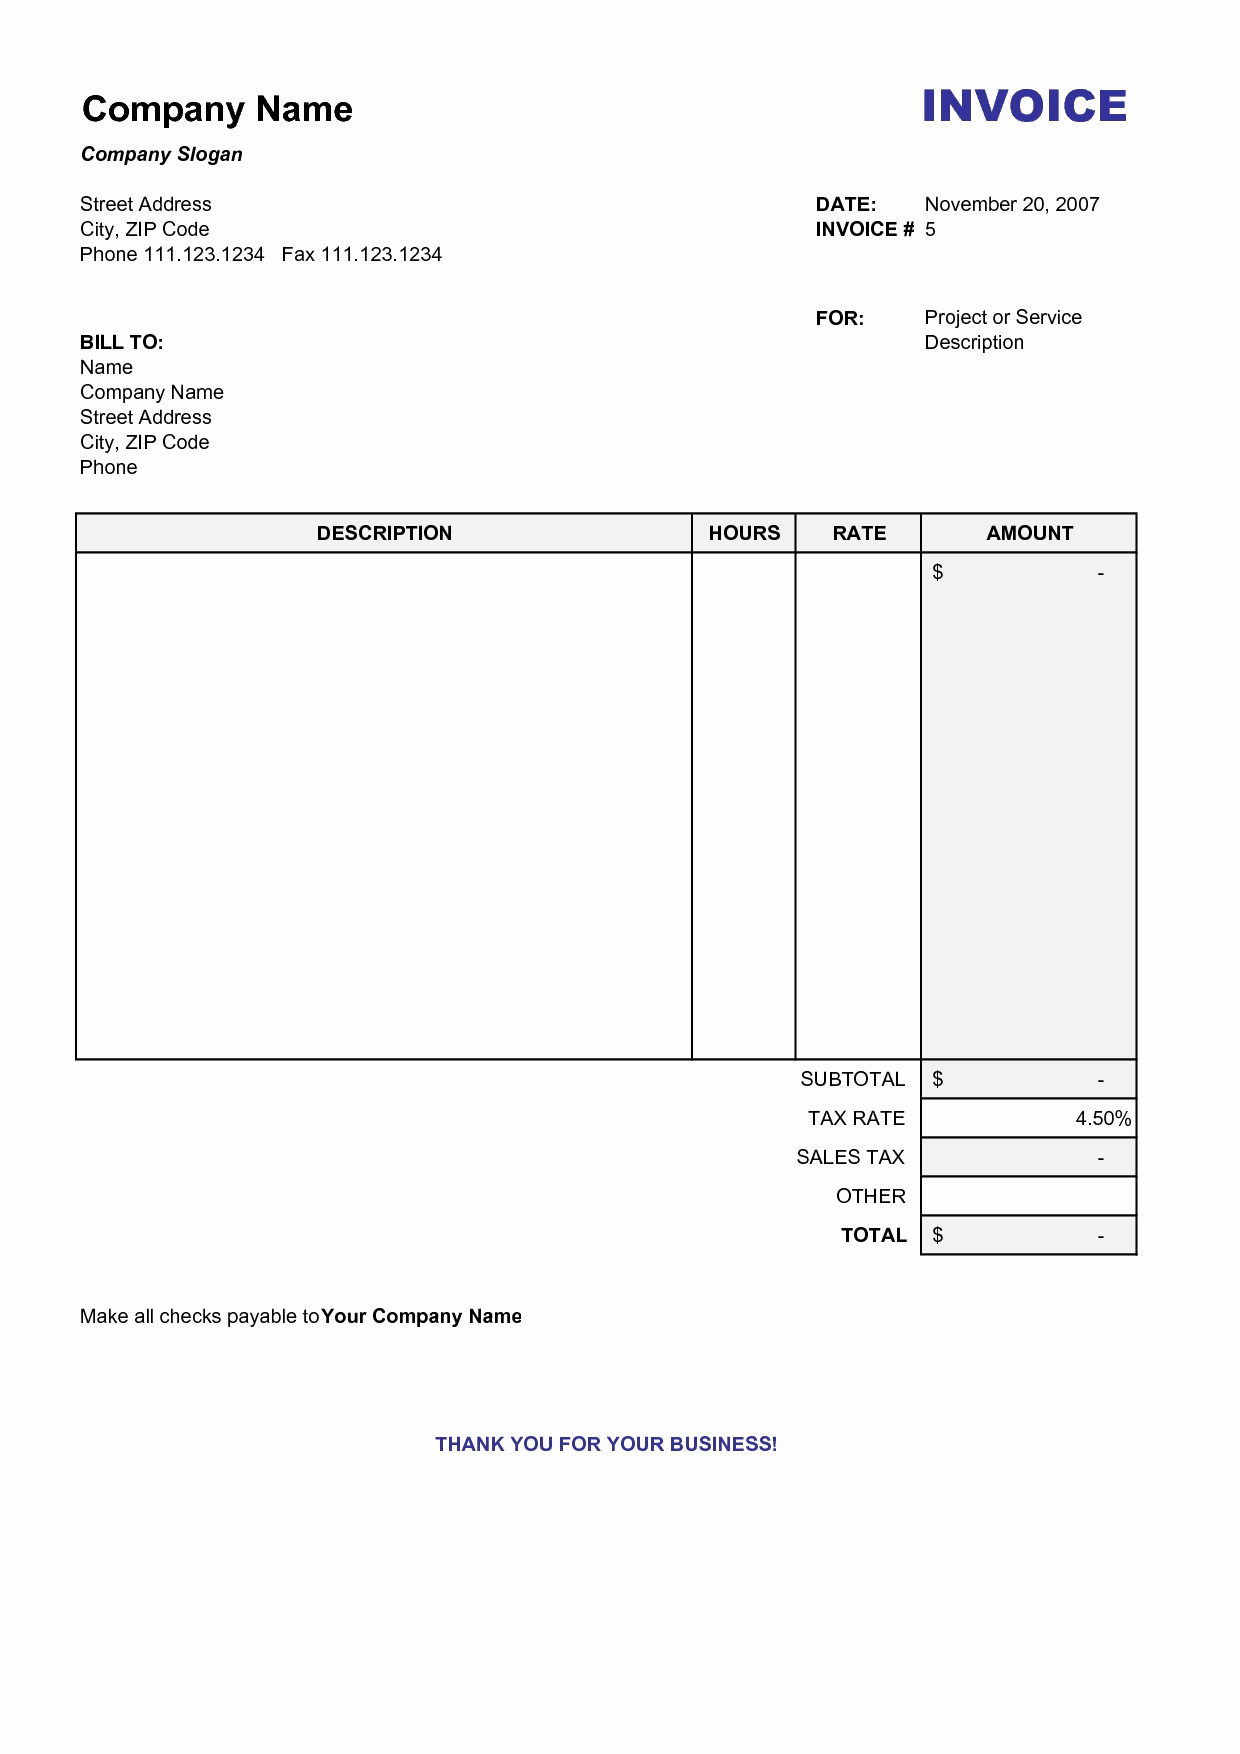 Blank Invoice Template Blankinvoice Org Resume Templates Print Free - Free Invoices Online Printable